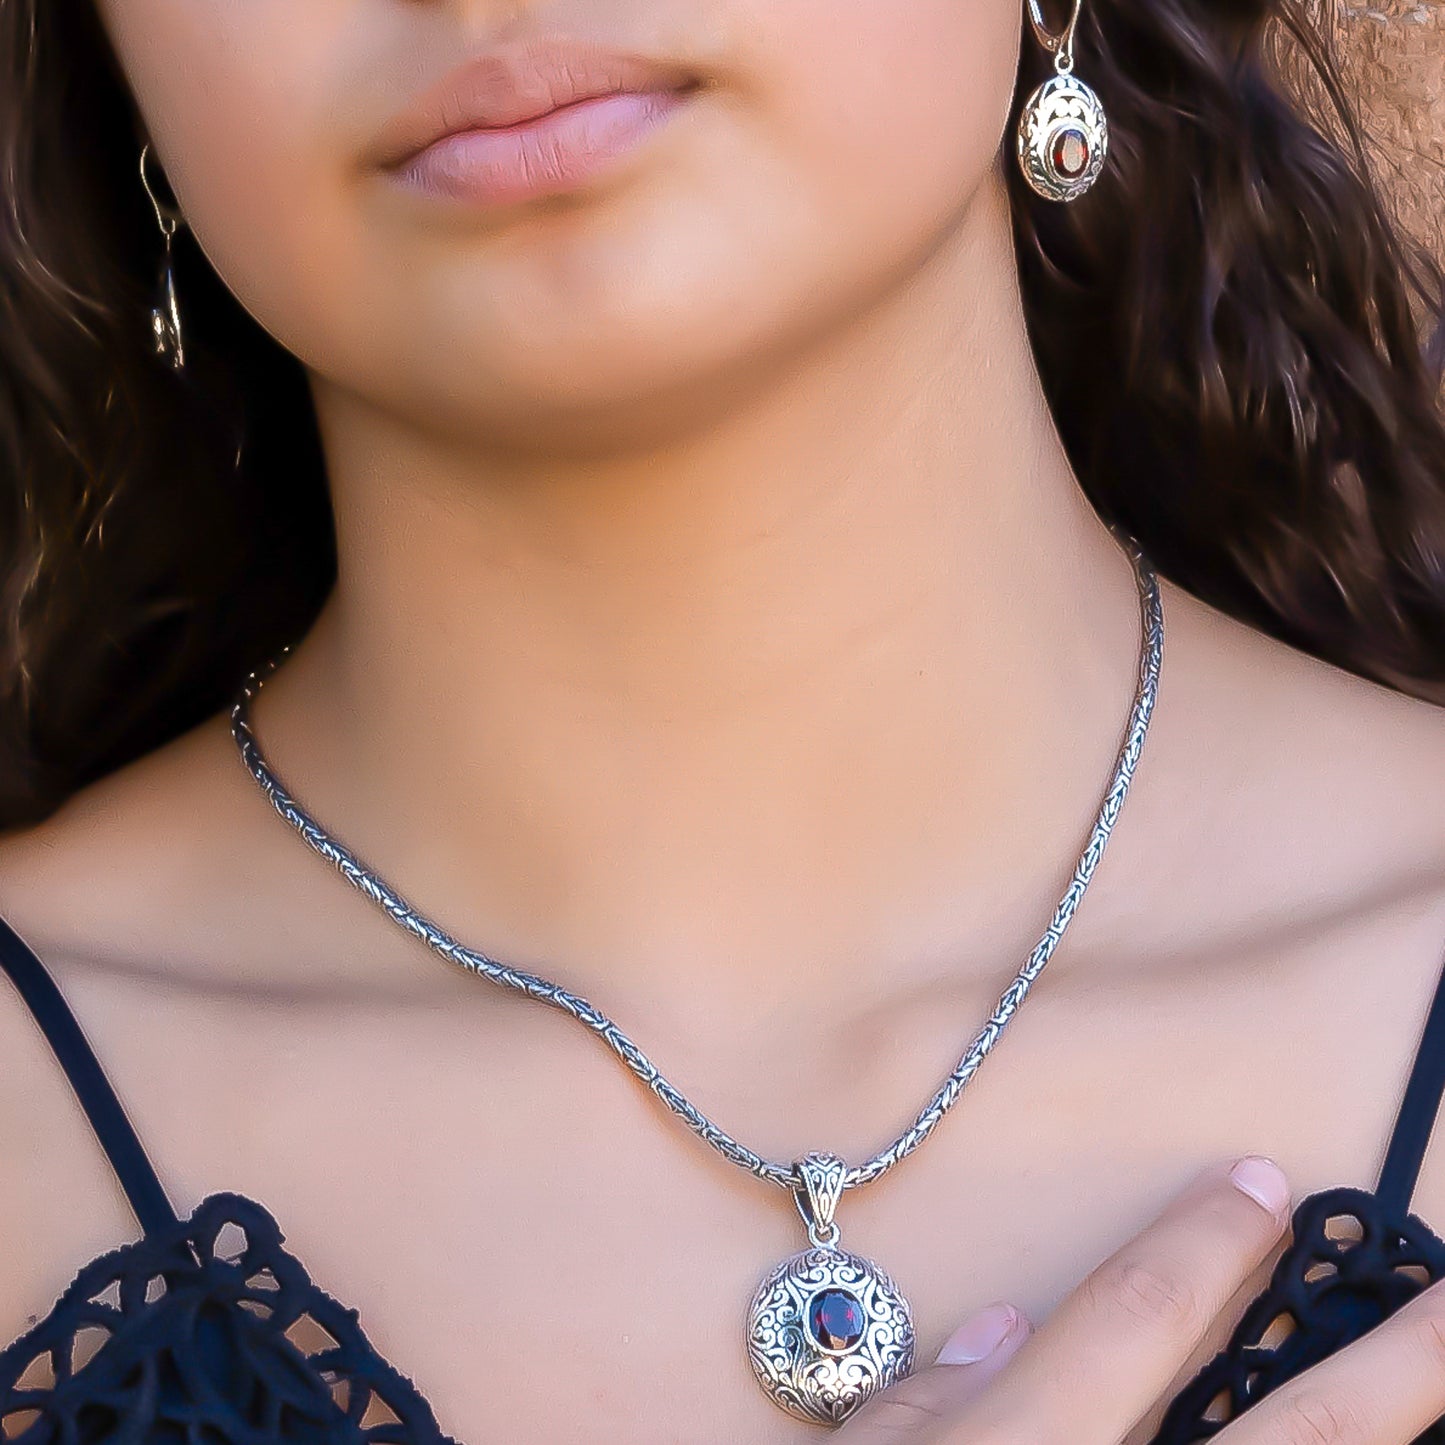 Woman wearing a byzantine chain necklace, silver and garnet pendant, and silver and garnet earrings.